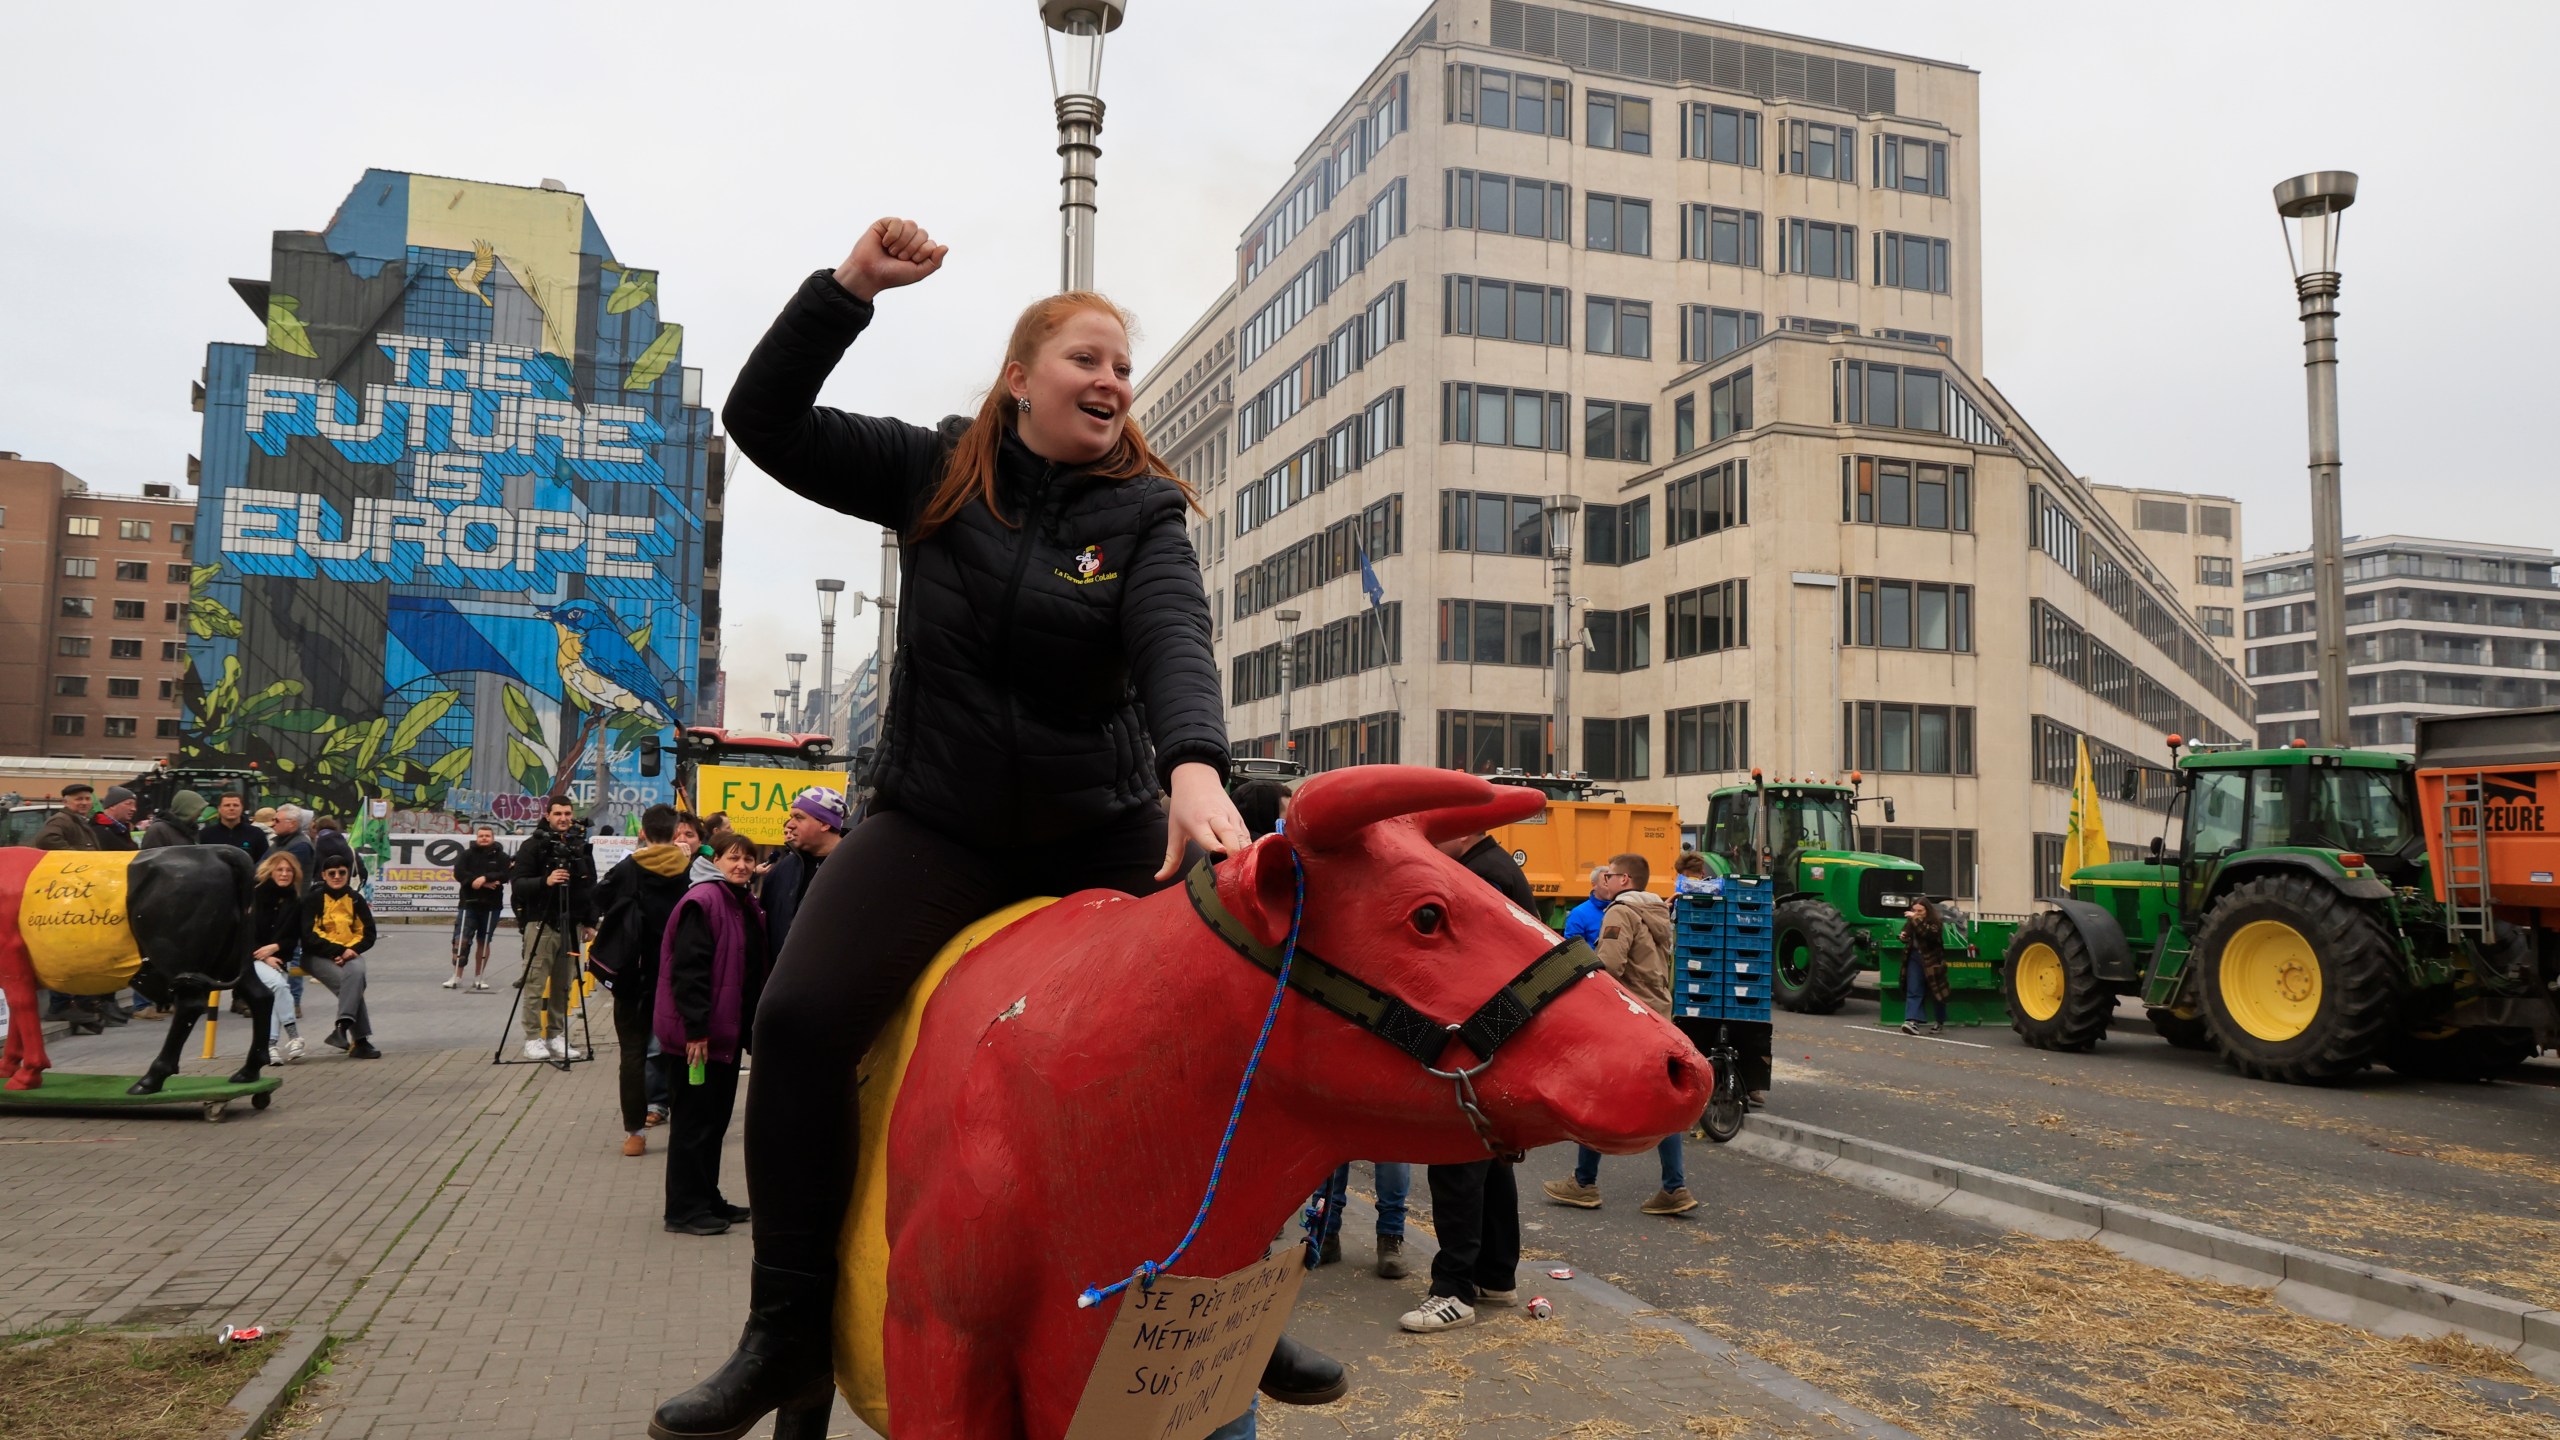 A protestor rides a plastic cow during a demonstration of farmers near the European Council building in Brussels, Tuesday, March 26, 2024. Dozens of tractors sealed off streets close to European Union headquarters where the 27 EU farm ministers are meeting to discuss the crisis in the sector which has led to months of demonstrations across the bloc. (AP Photo/Geert Vanden Wijngaert)